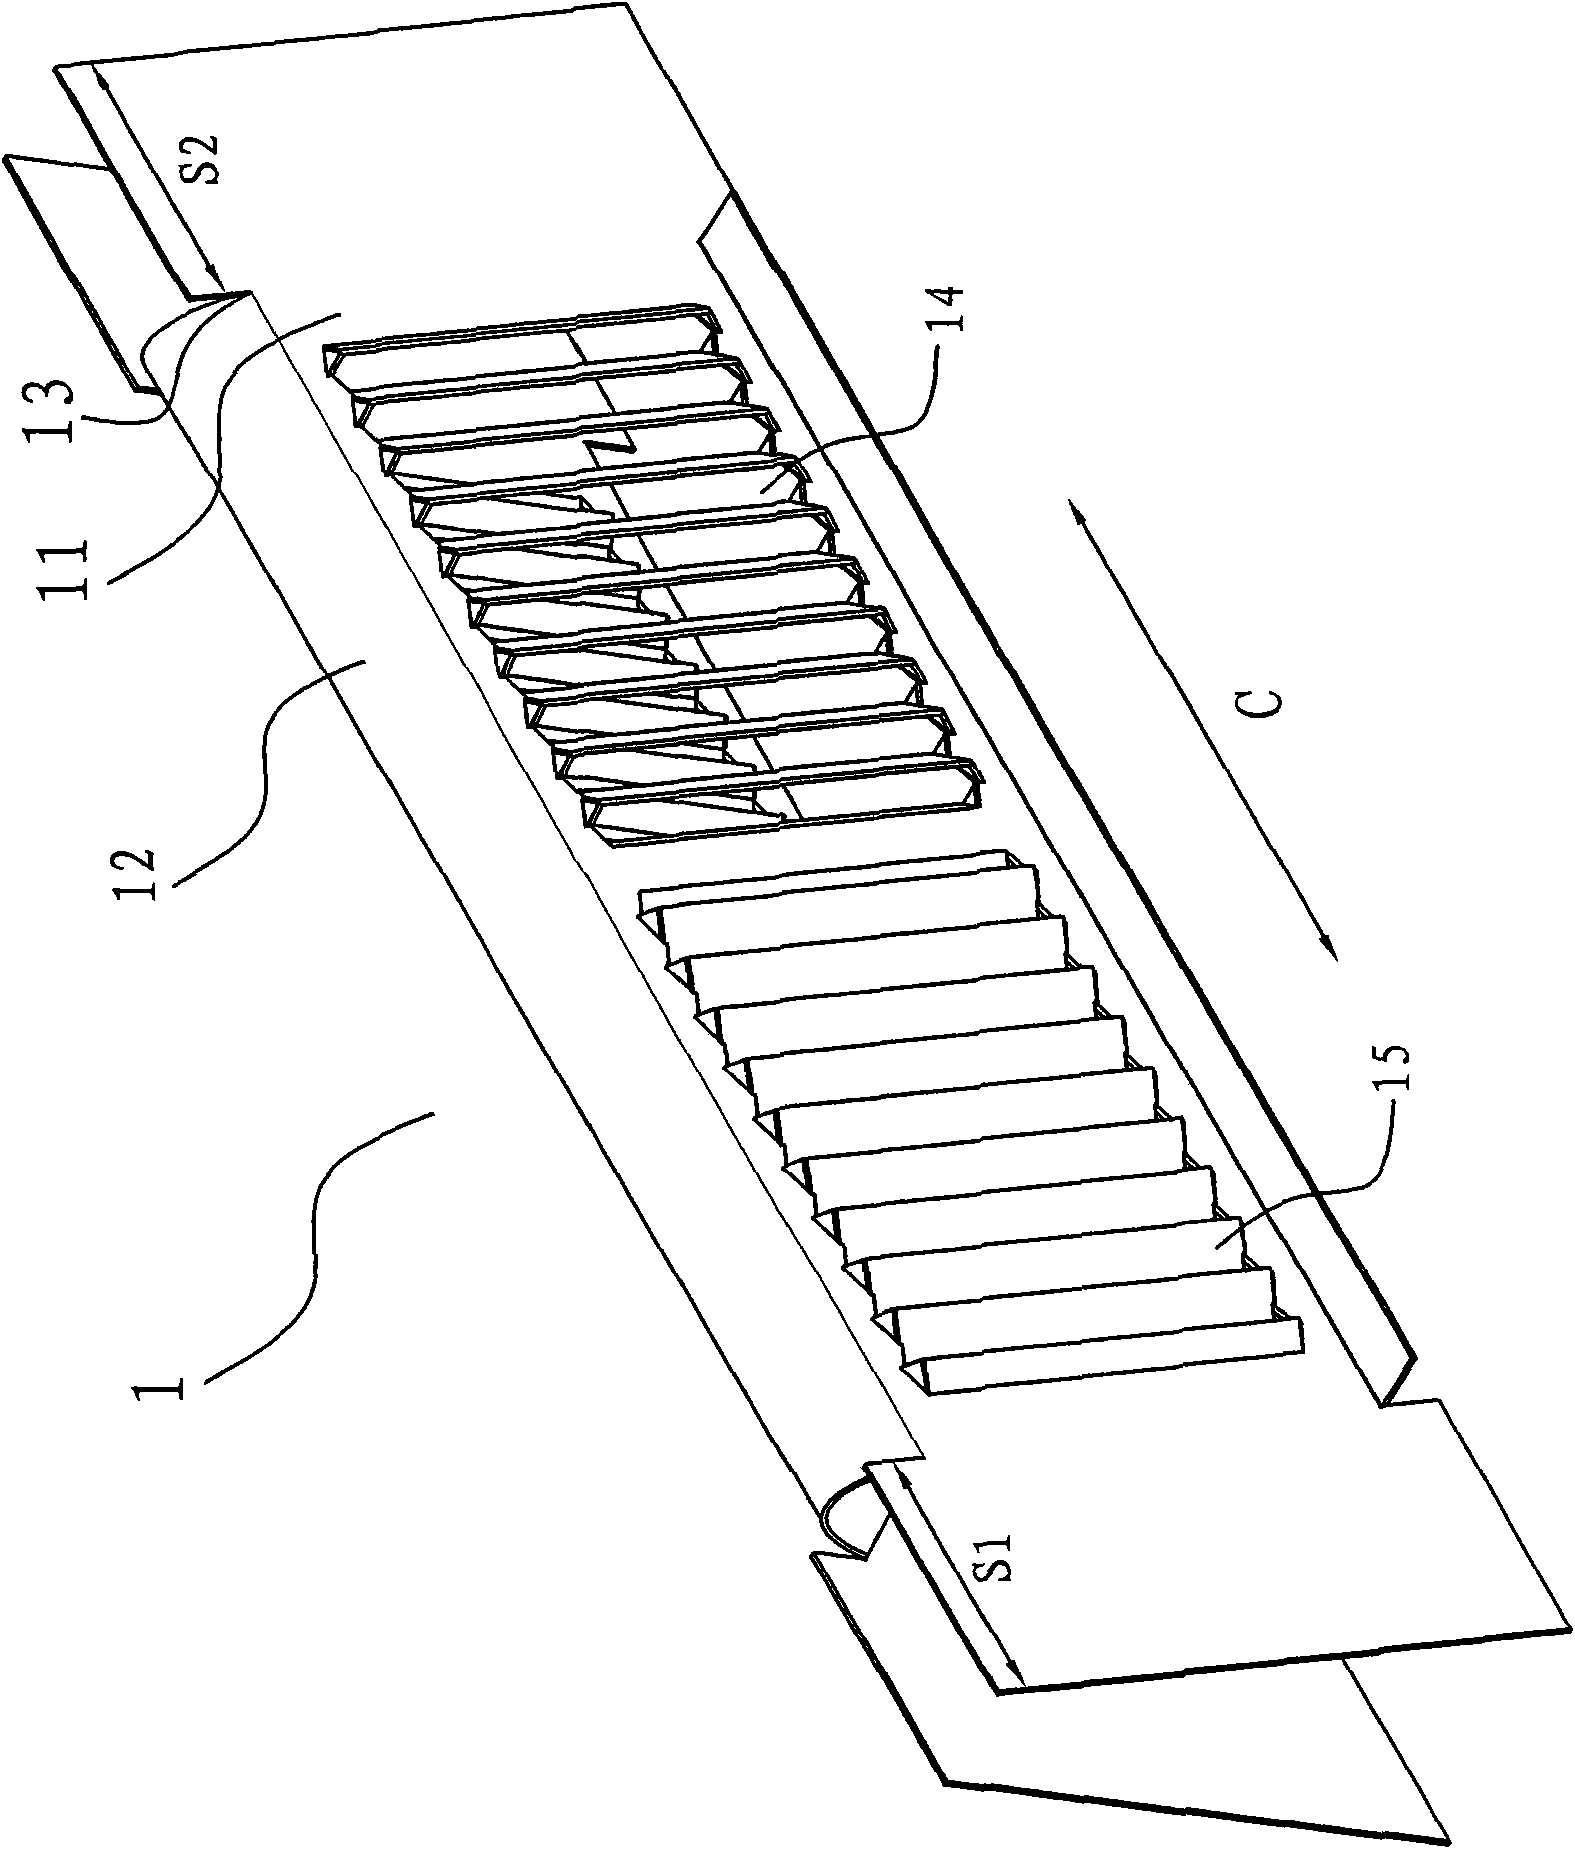 Fin and heat exchanger with same